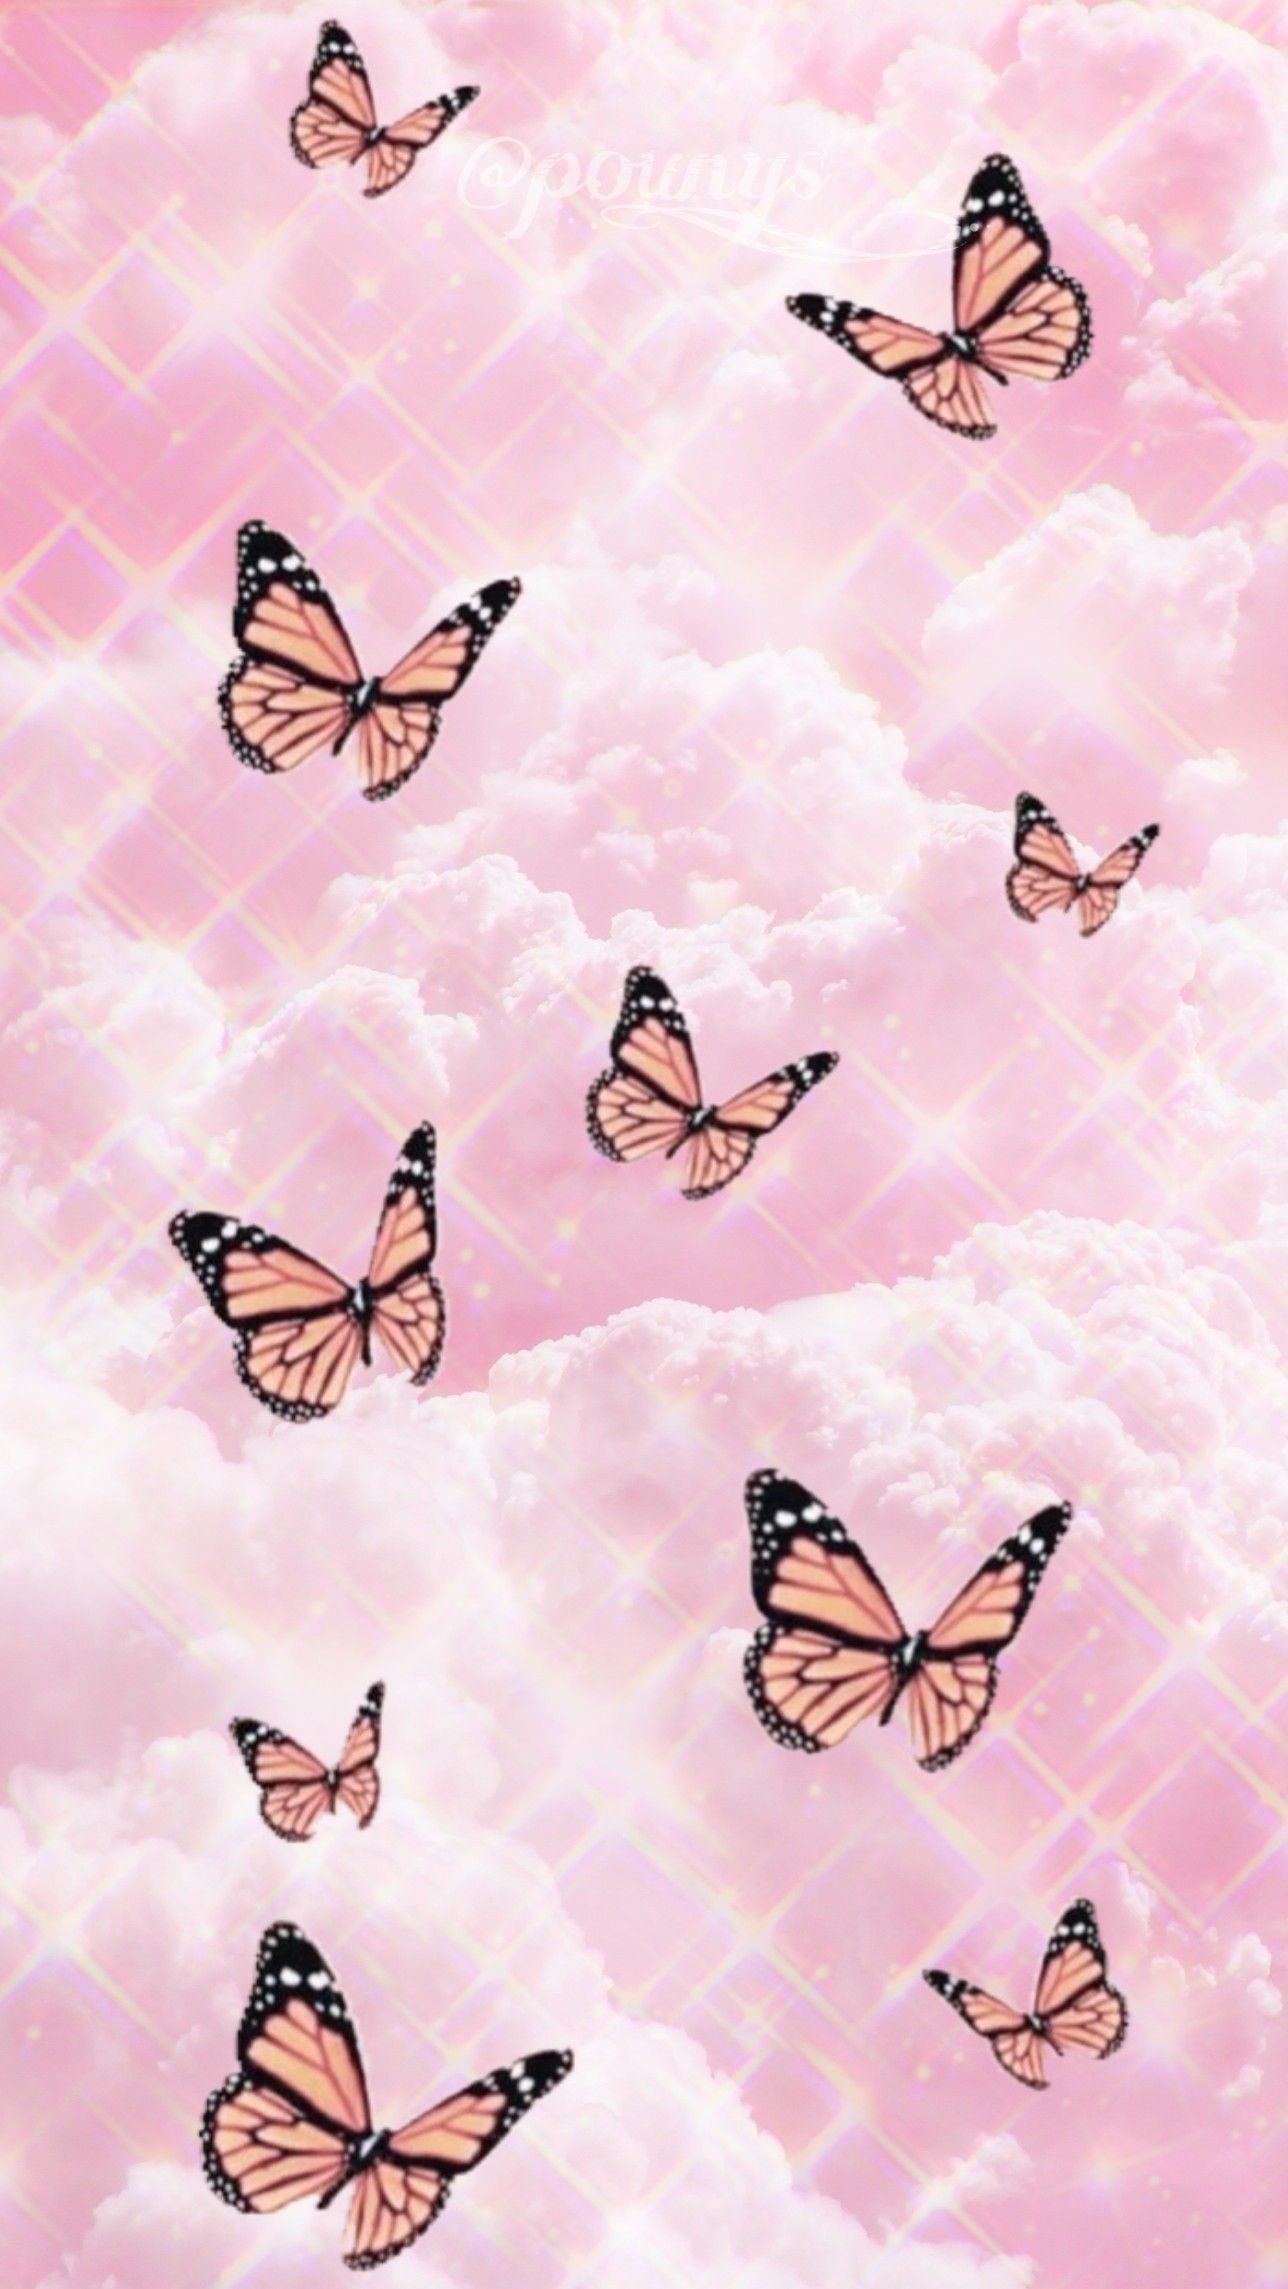 Pink aesthetic wallpaper with butterflies in the clouds - Cute pink, butterfly